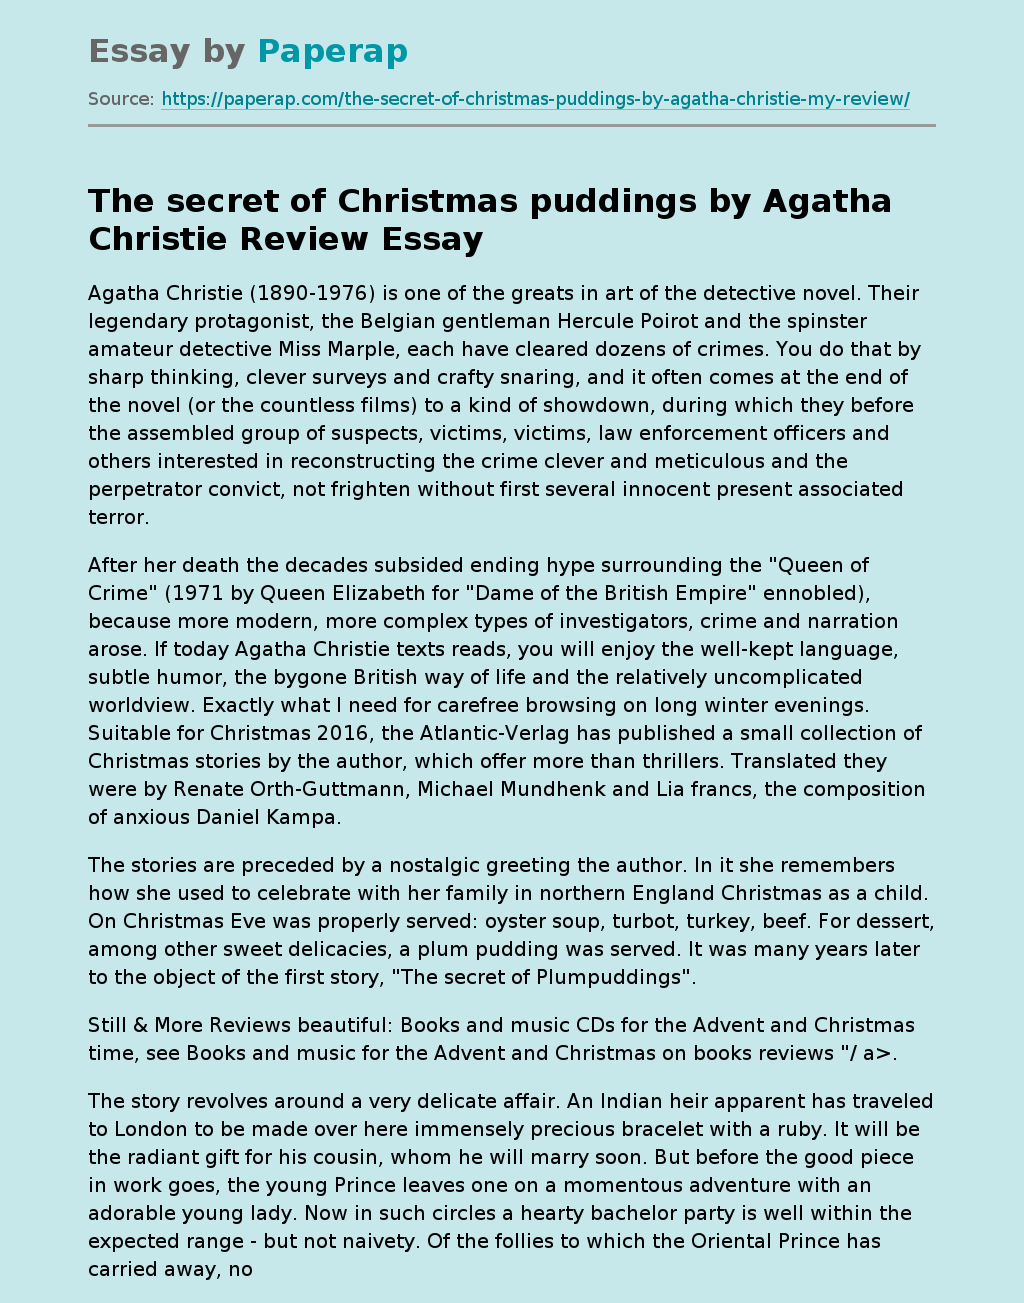 The Secret of Christmas Puddings by Agatha Christie Review